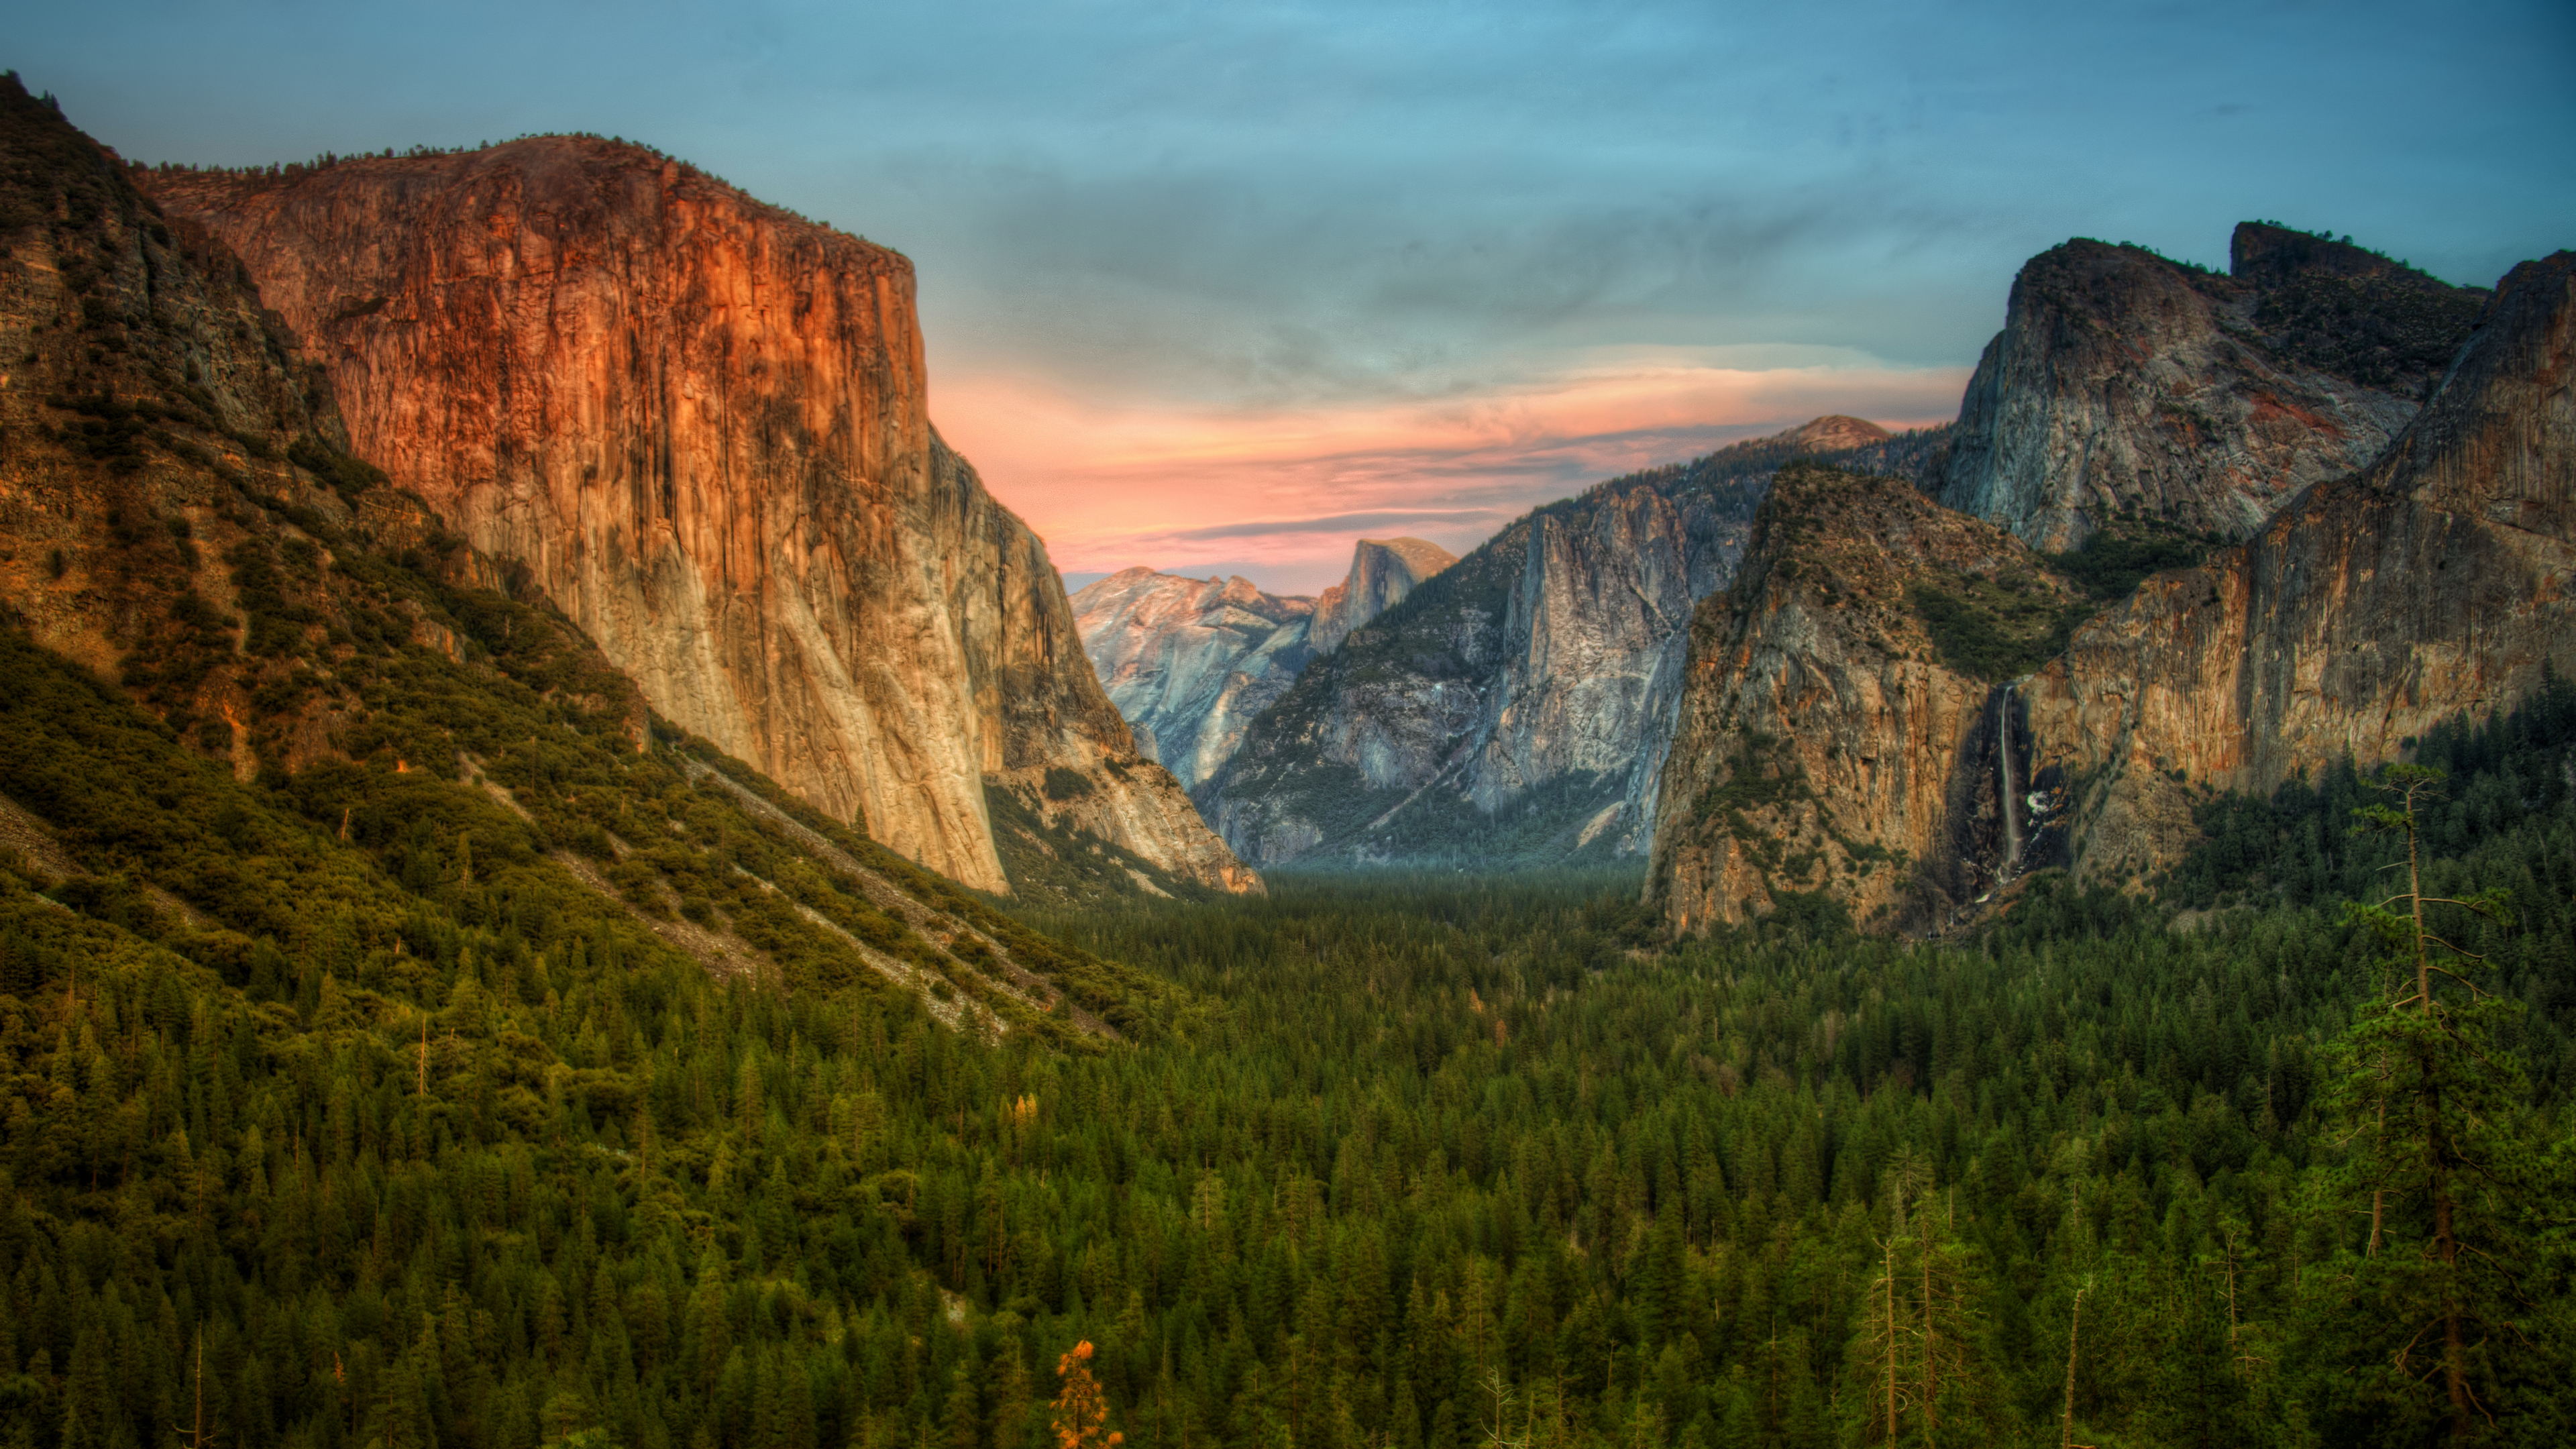 General 3840x2160 Trey Ratcliff 4K photography California nature forest mountains trees sunset glow Yosemite Valley